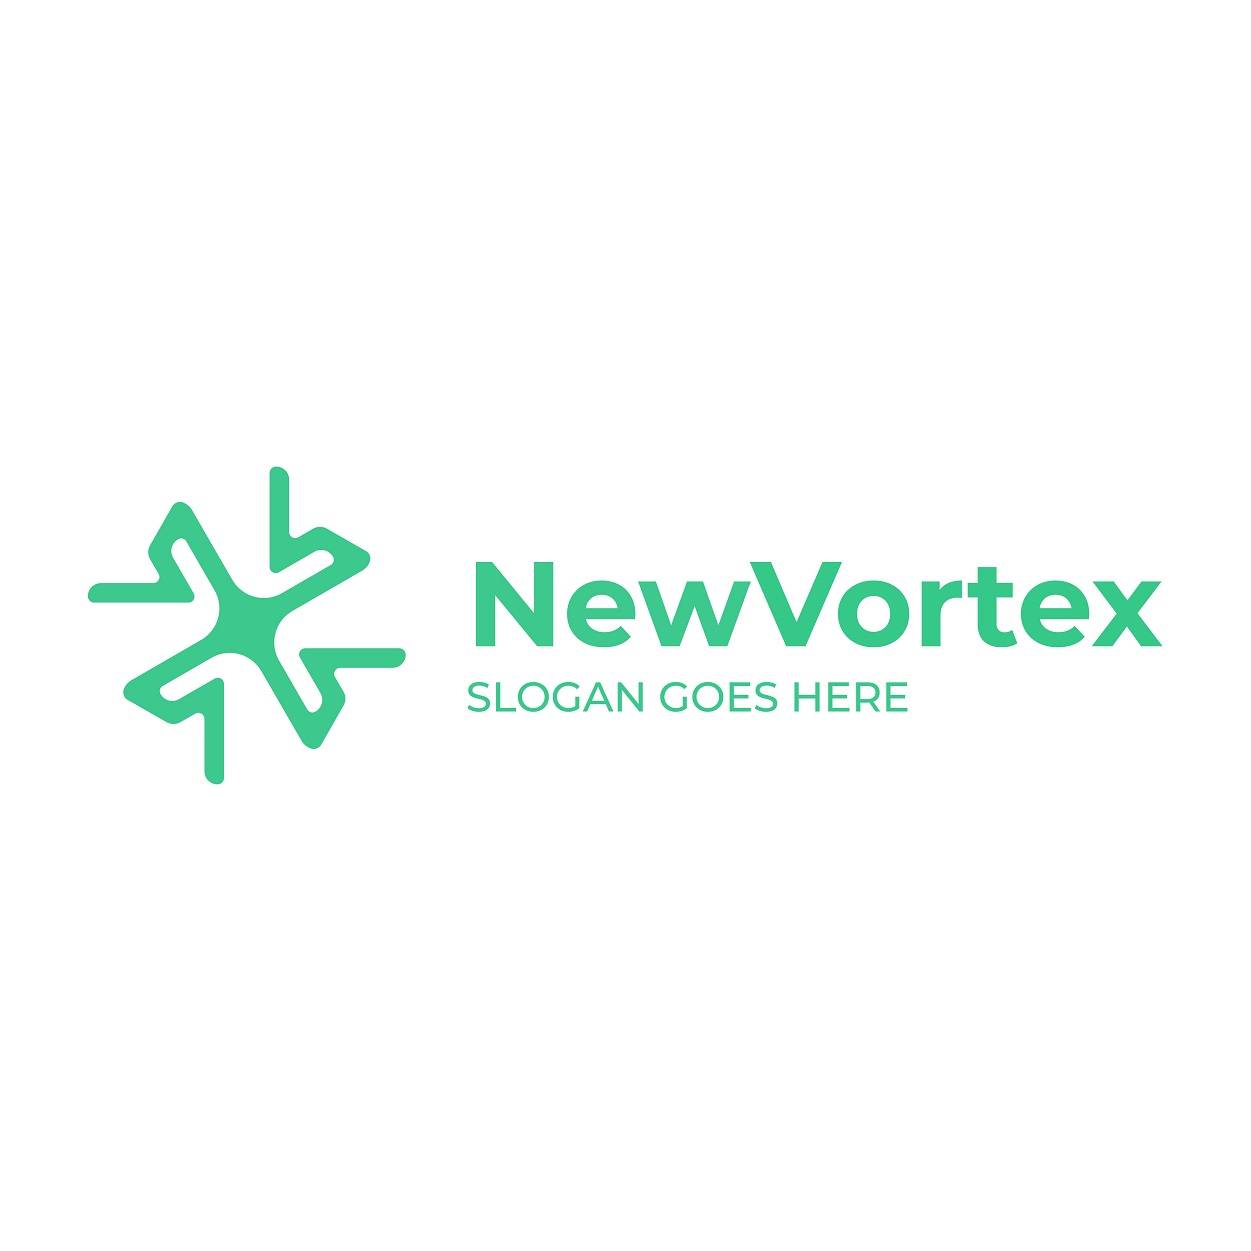 New Vortex abstract shape logo design in green color